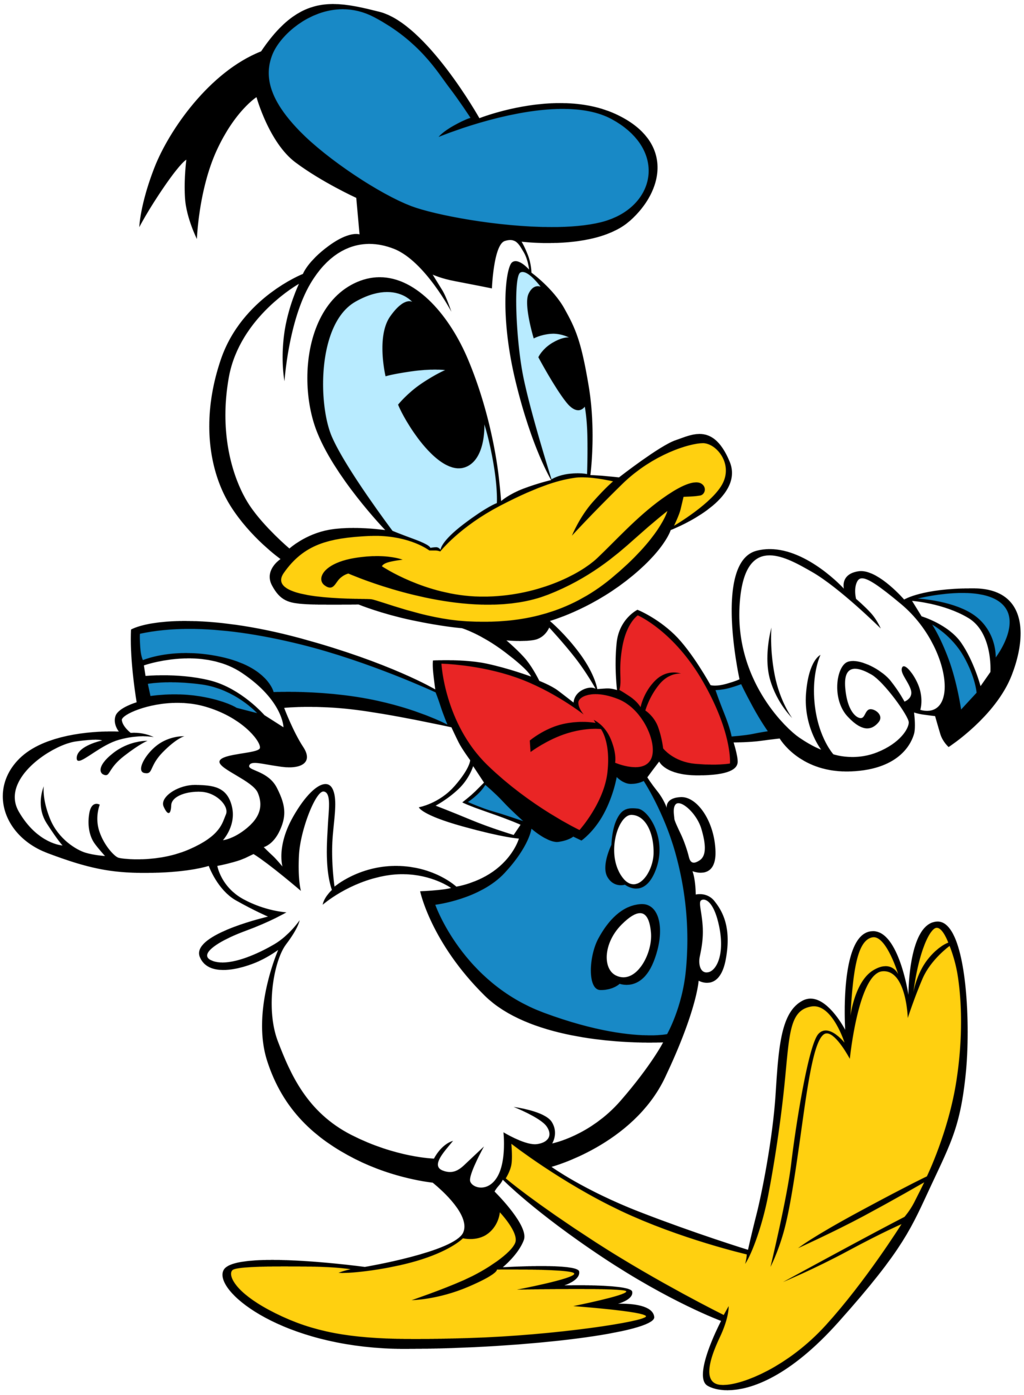 donald duck png image collection for download #25587